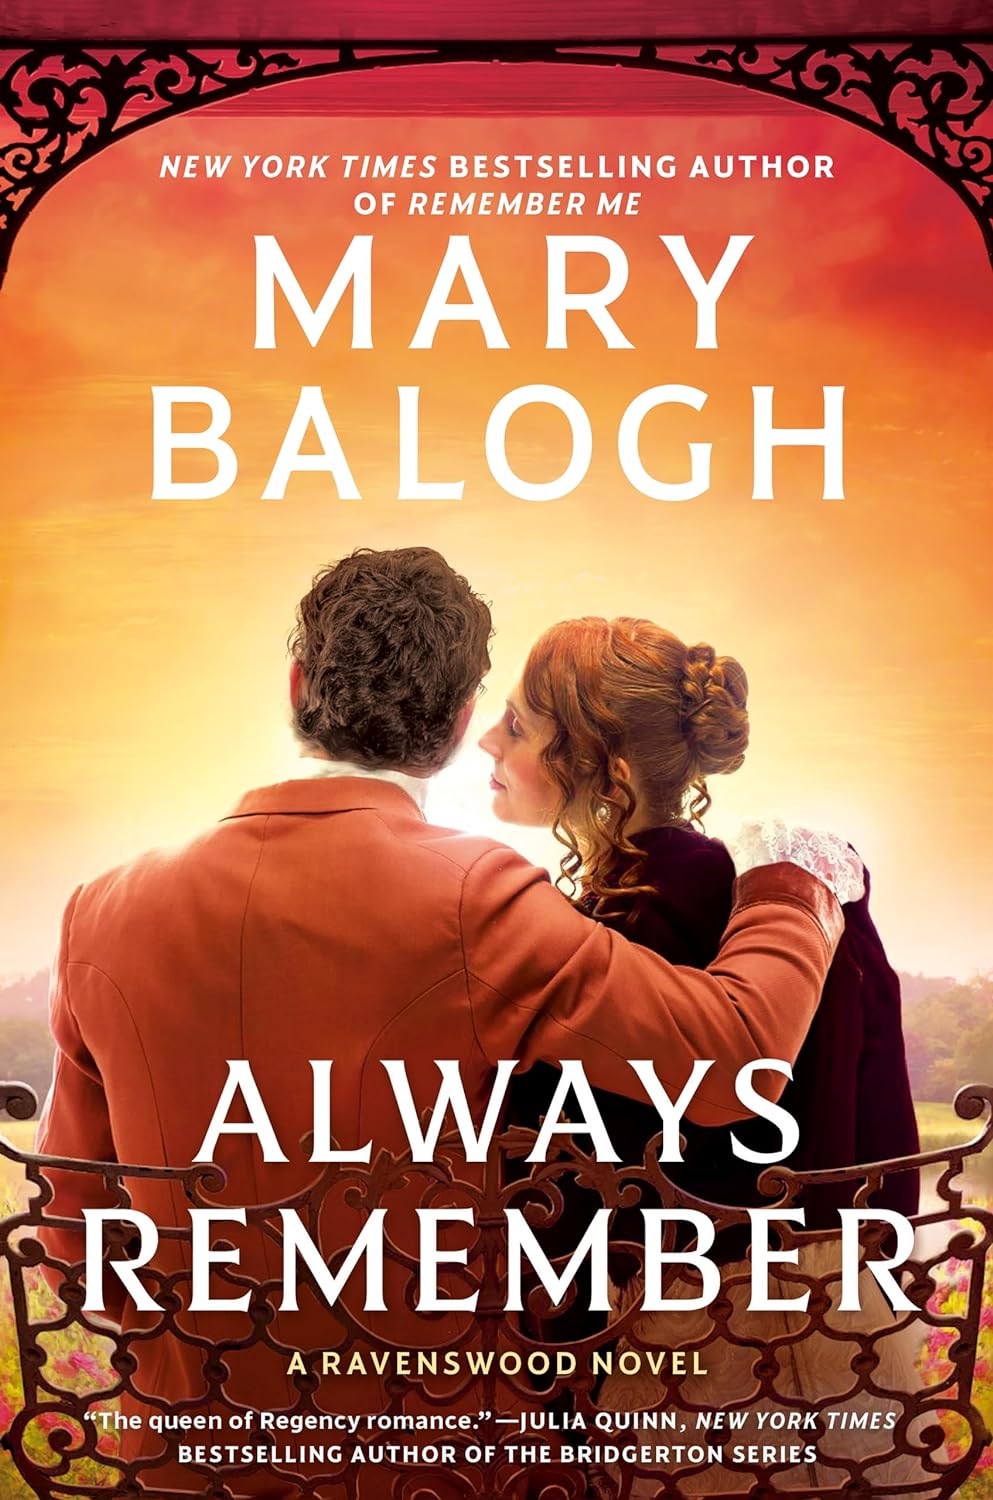 always-remember-mary-balogh